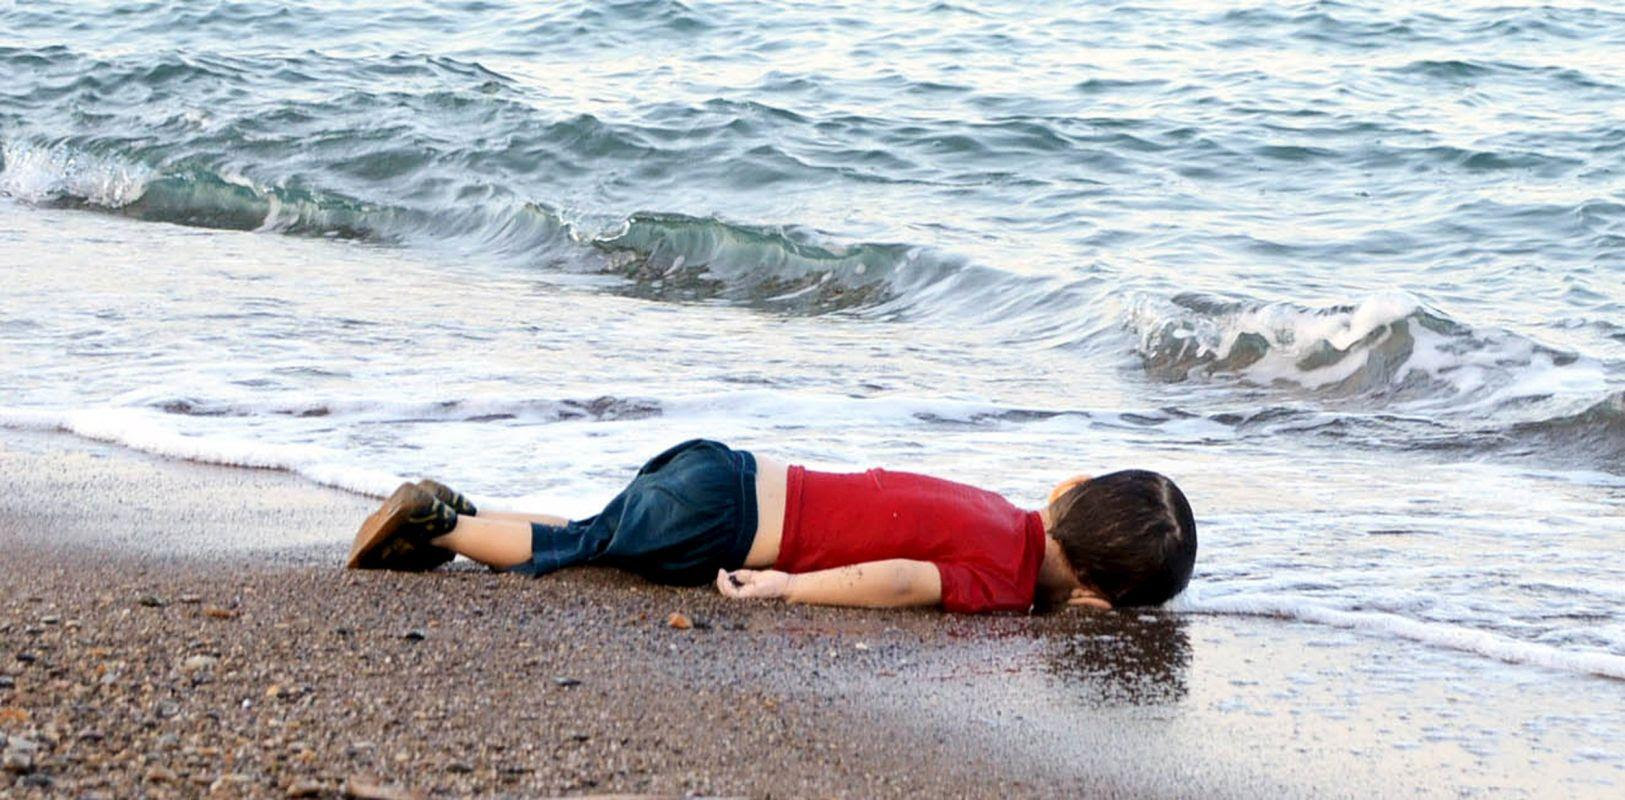 A young migrant, who drowned in a failed attempt to sail to the Greek island of Kos, lies on the shore in the Turkish coastal town of Bodrum